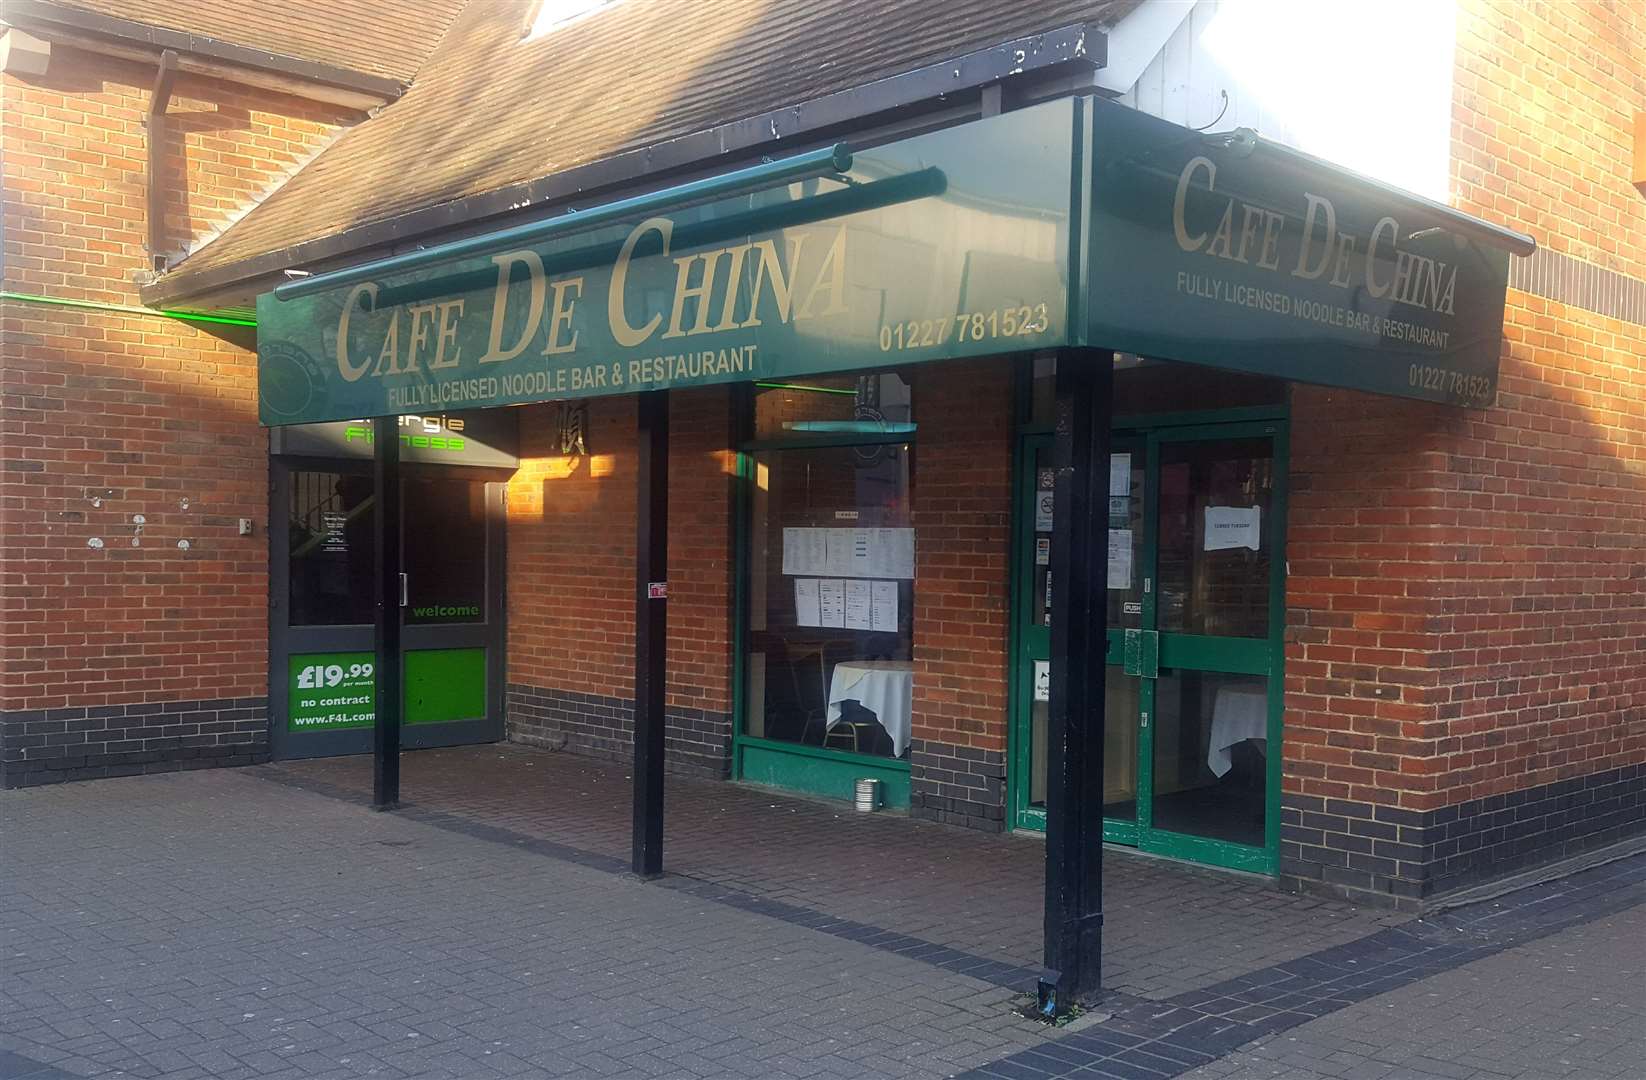 The eatery's kitchen was in need of a "deep clean", according to hygiene inspectors